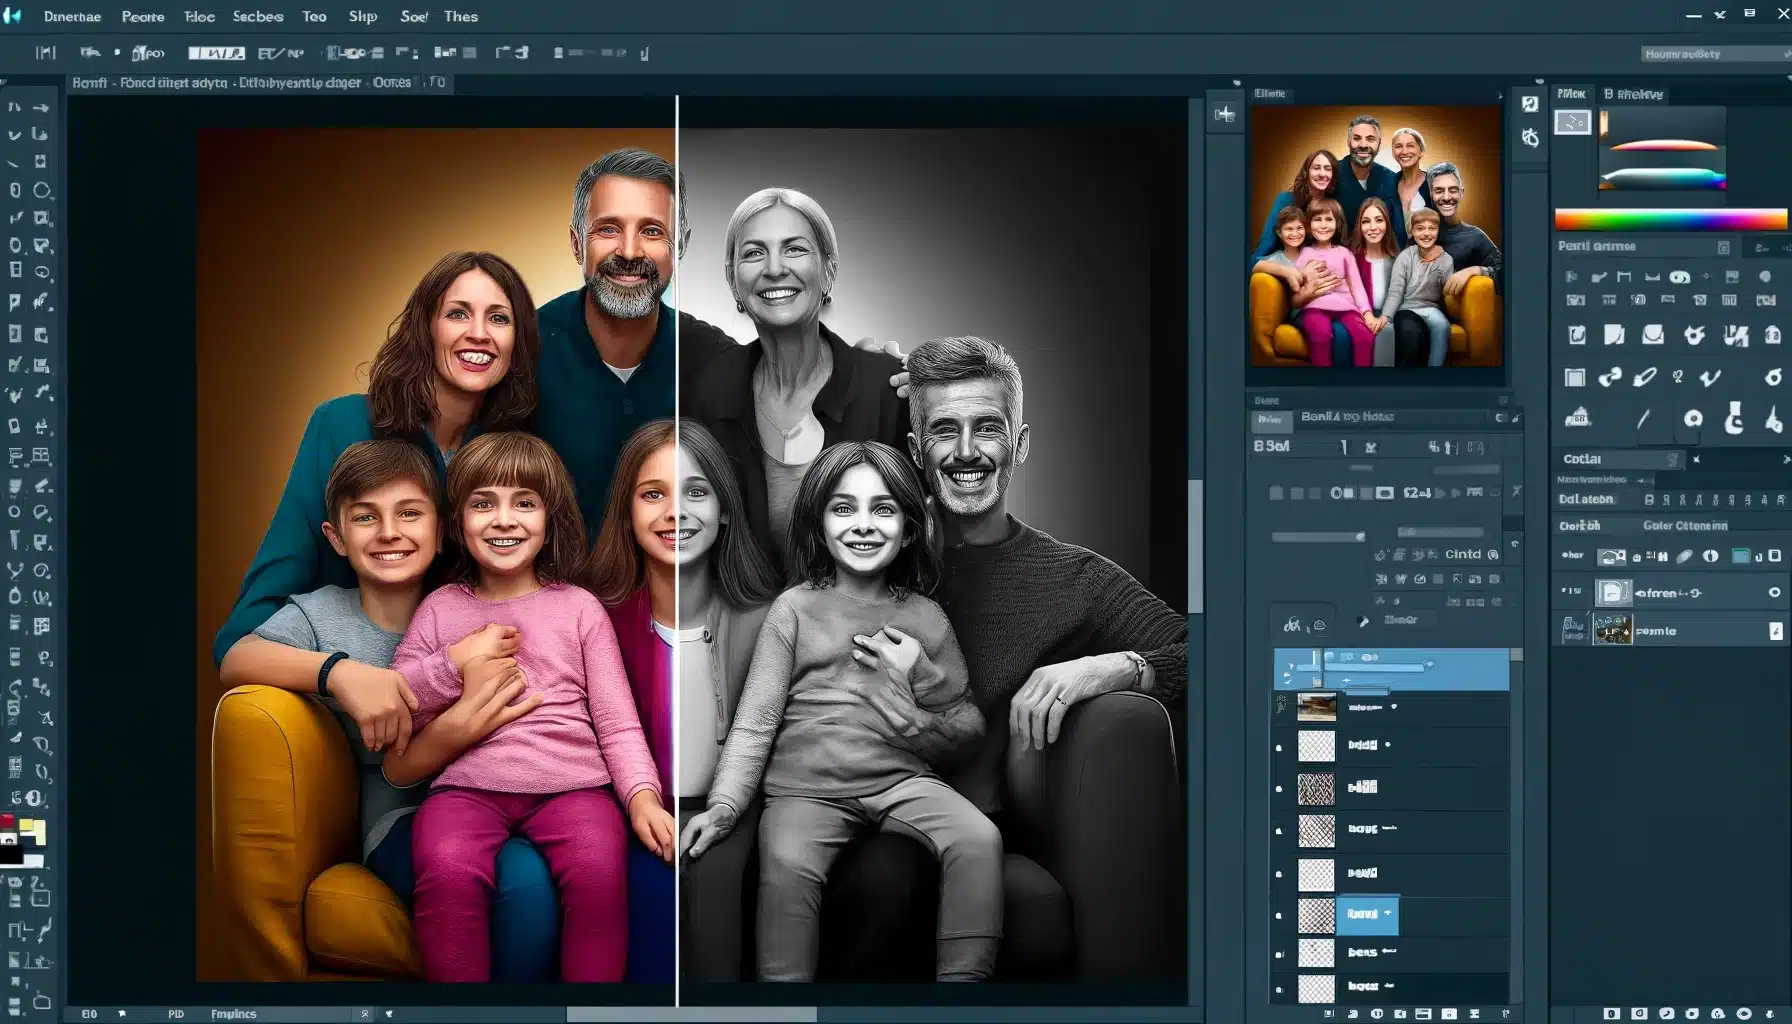 A highly realistic image of the Adobe Photoshop interface showing a family photo with five people, split into two halves. One half is in color and the other half is in black and white.